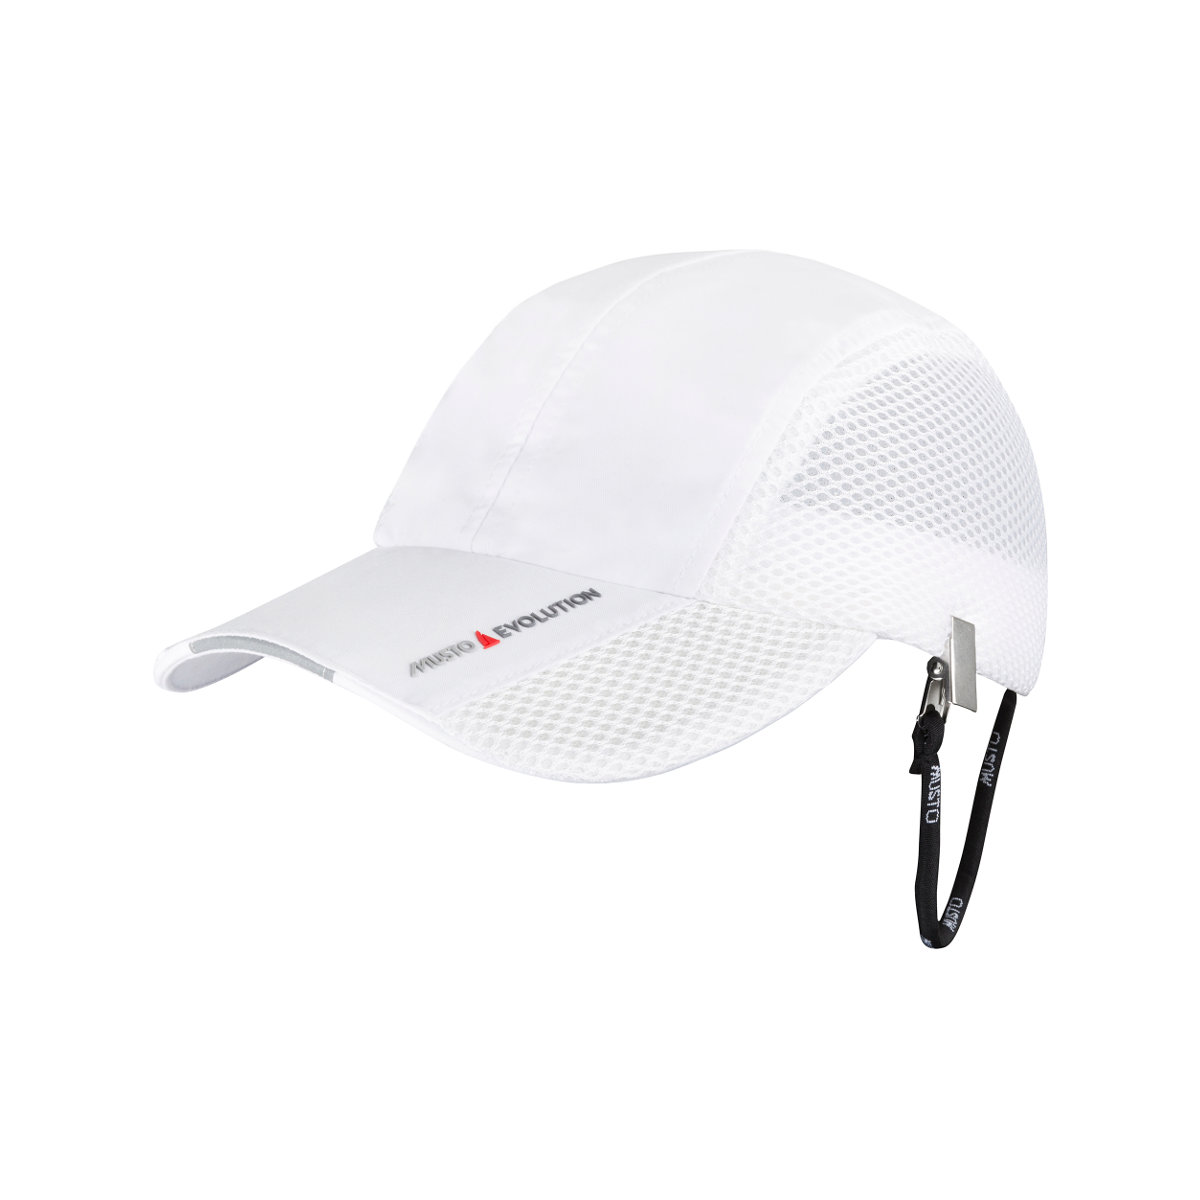 Musto Fast Dry Technical casquette voile blanche